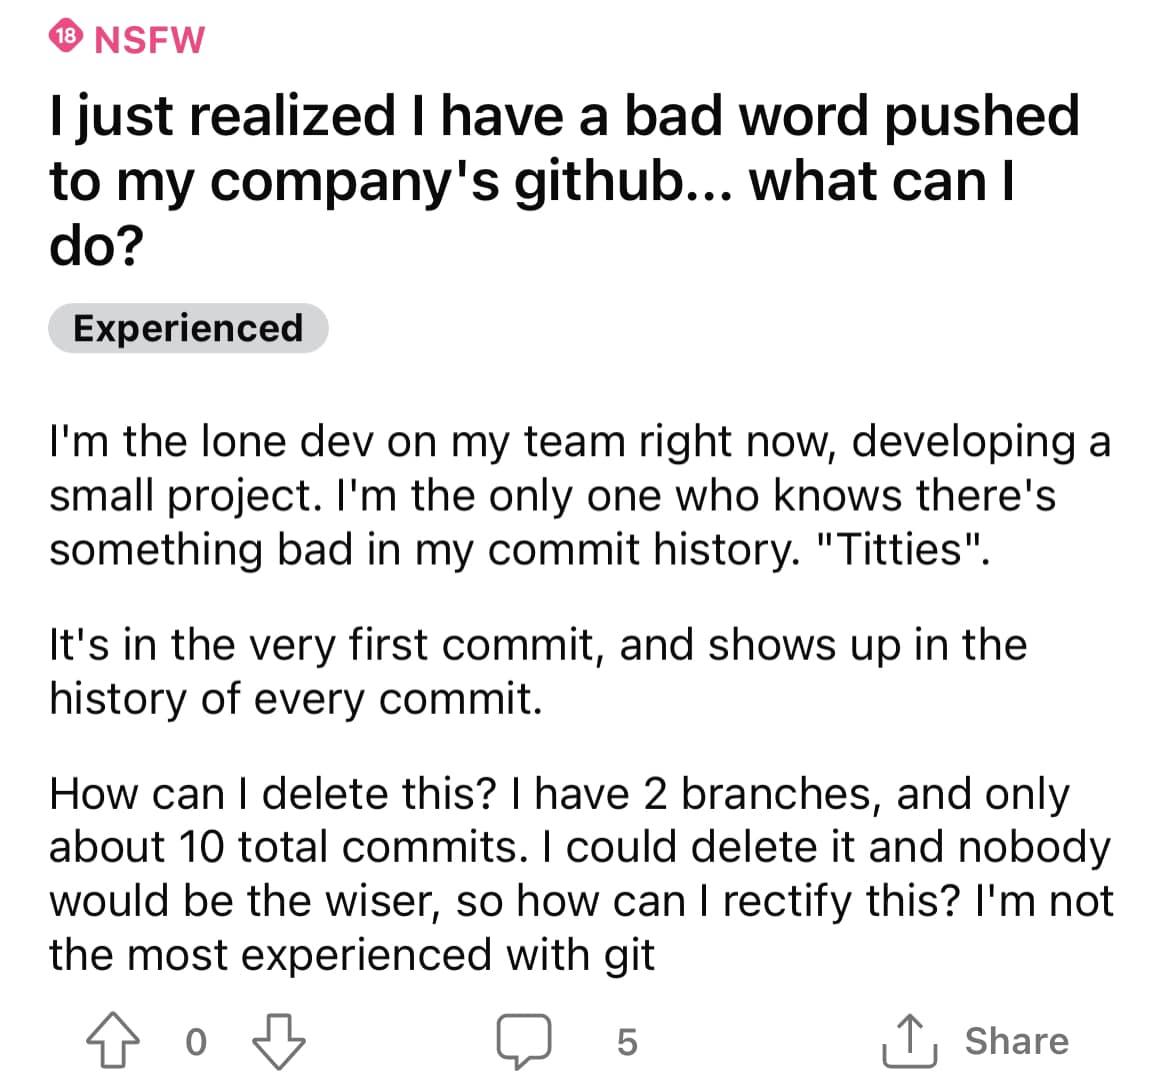 I just realized i have a bad word pushed to my company's GitHub